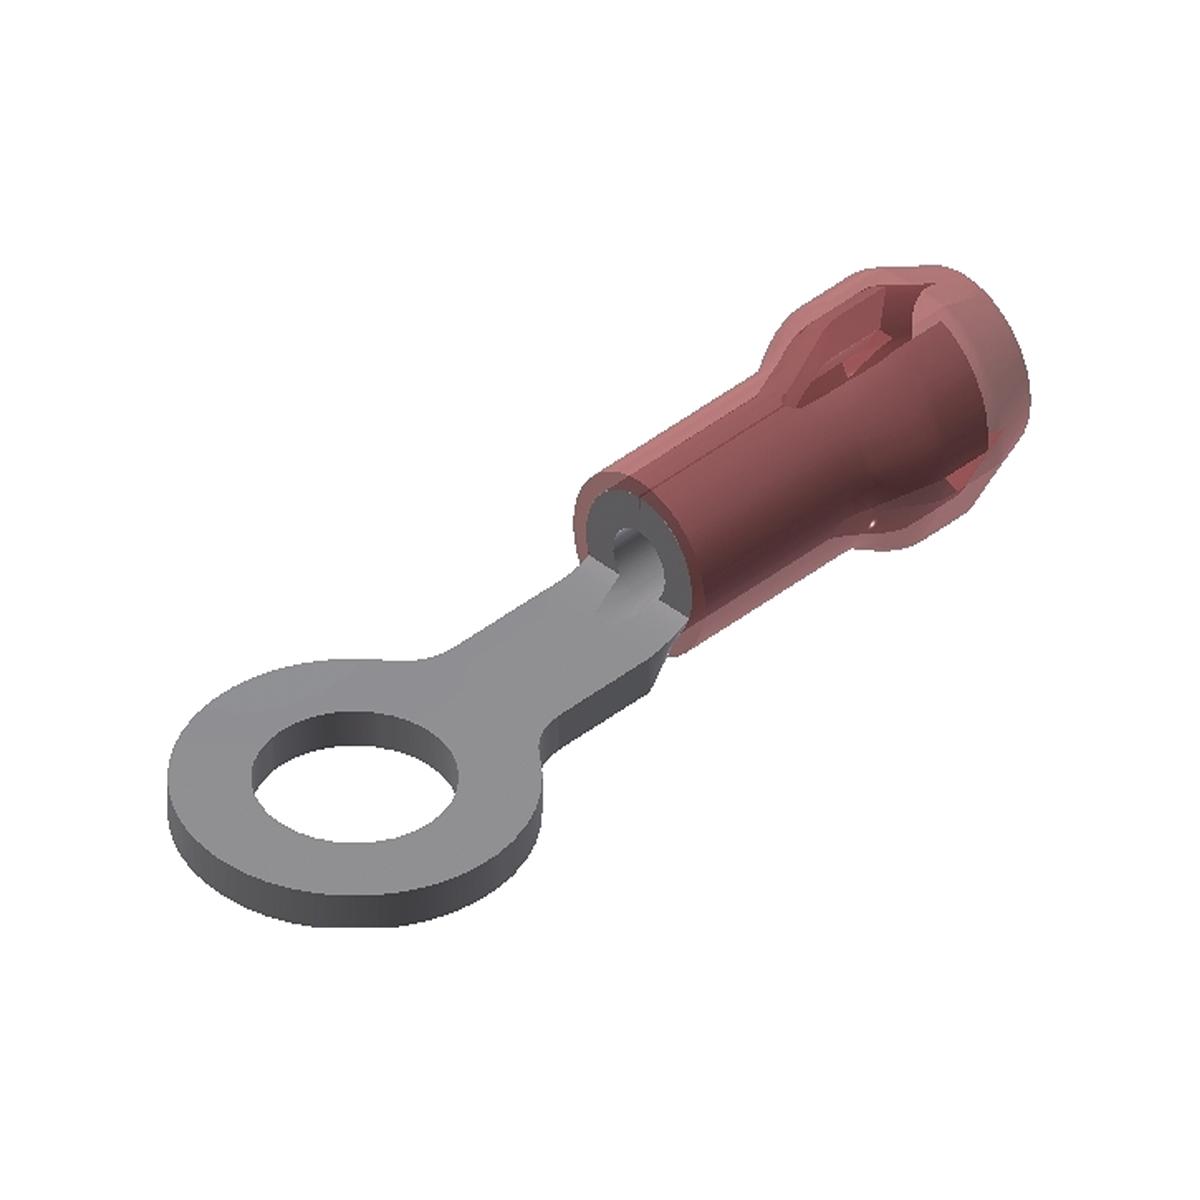 Hubbell YAE18N3 Nylon Ring Terminal For 22 - 18 AWG.  ; Features: INSULUG Type YAE-N Nylon Insulated Terminals Are Designed With A Multi finger Insulation Grip For Paper, EPR And Other Elastic Or Hard To Grip Insulations, The Metal Fingers Firmly Grip The Insulation Prov